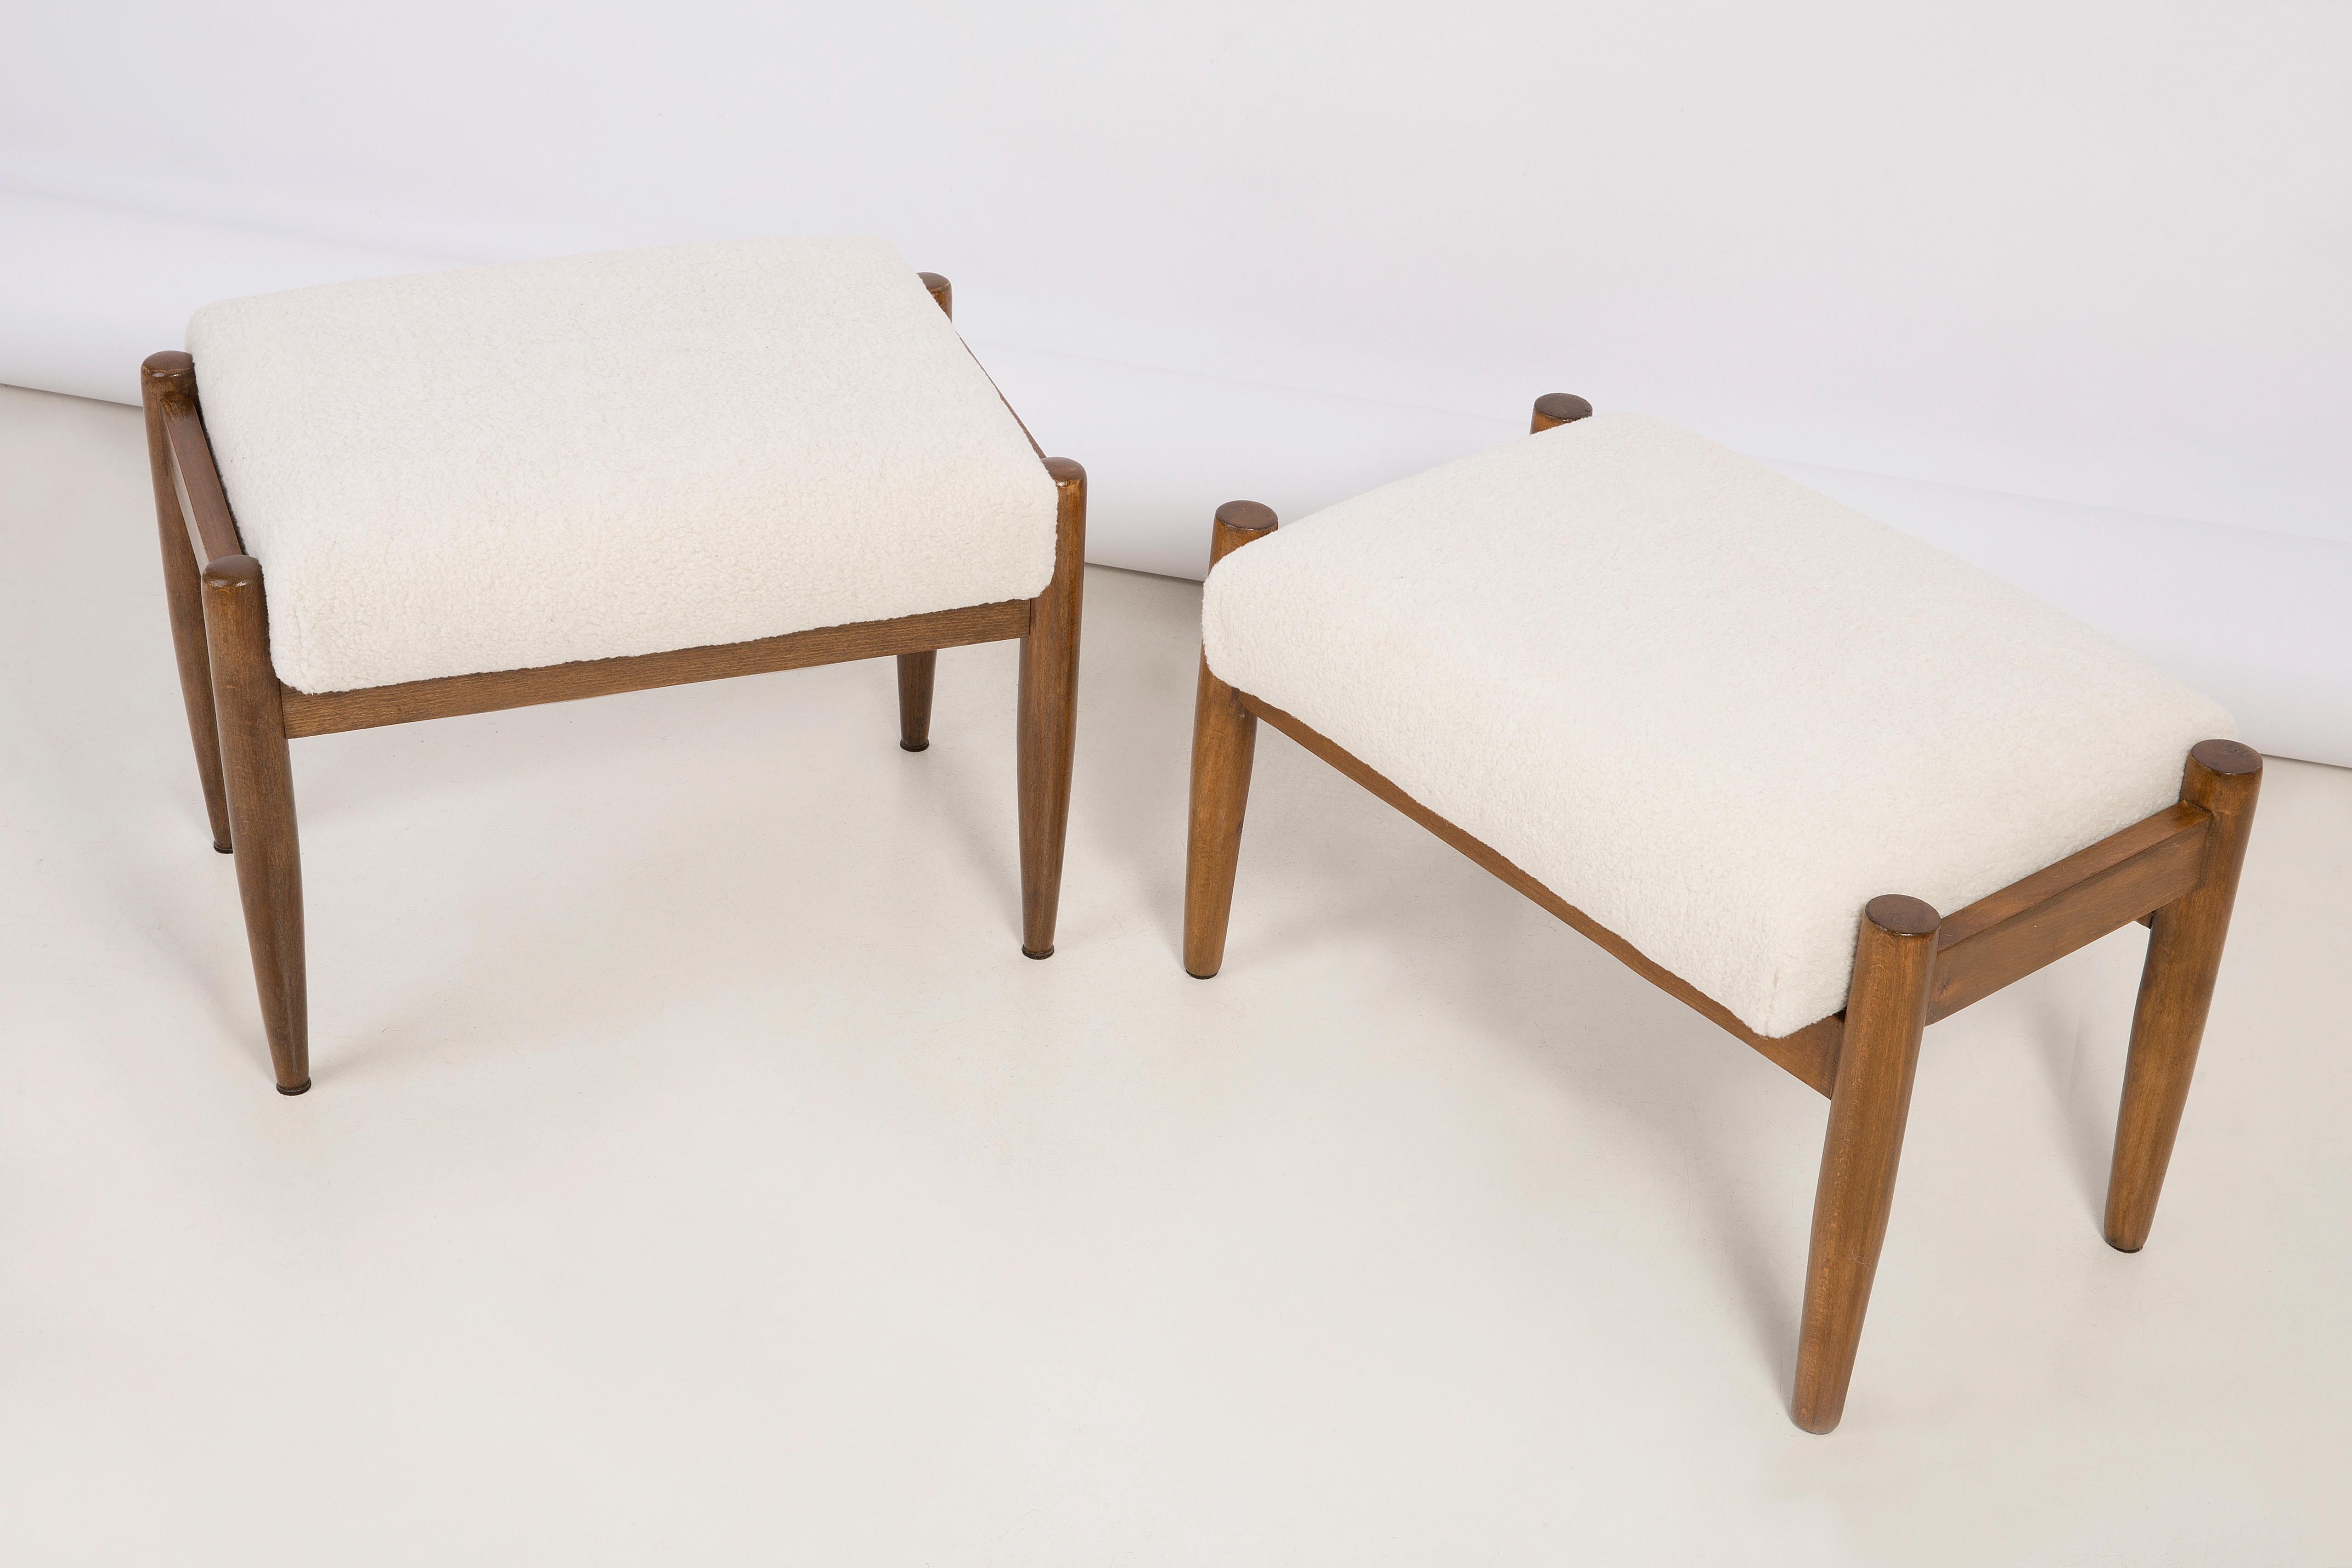 Stools from the turn of the 1960s. The stools consist of an upholstered part, a seat and wooden legs narrowing downwards, characteristic of the 1960s style.

Stools were designed by Edmund Homa, a Polish architect, designer of industrial design and